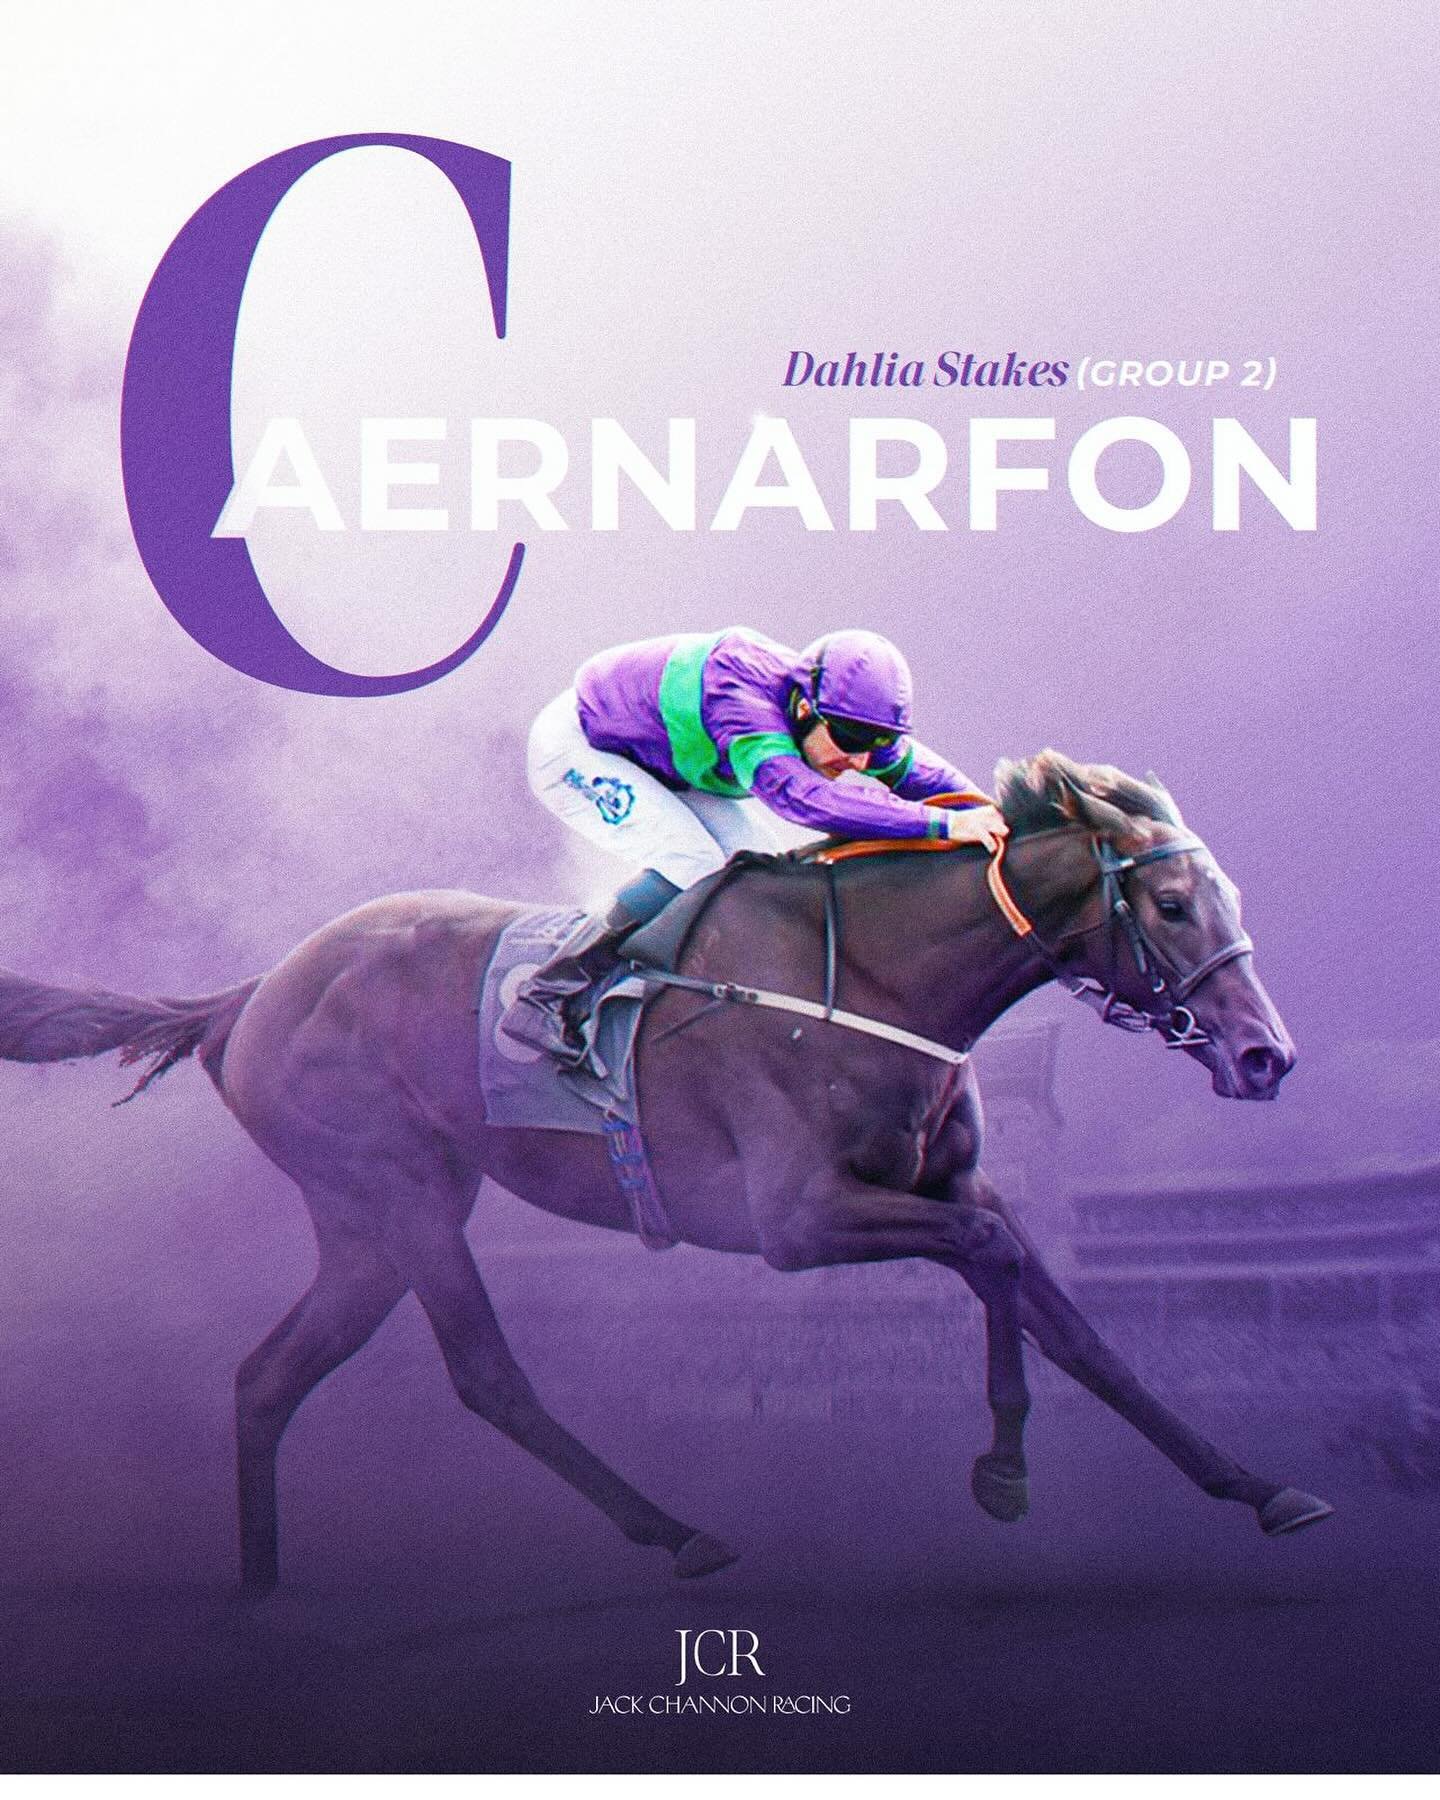 An exciting day ahead with Caernarfon making her seasonal reappearance in the Dahlia Stakes (Group 2) at Newmarket under David Probert. Best of luck to all connections 🏇 #JCR